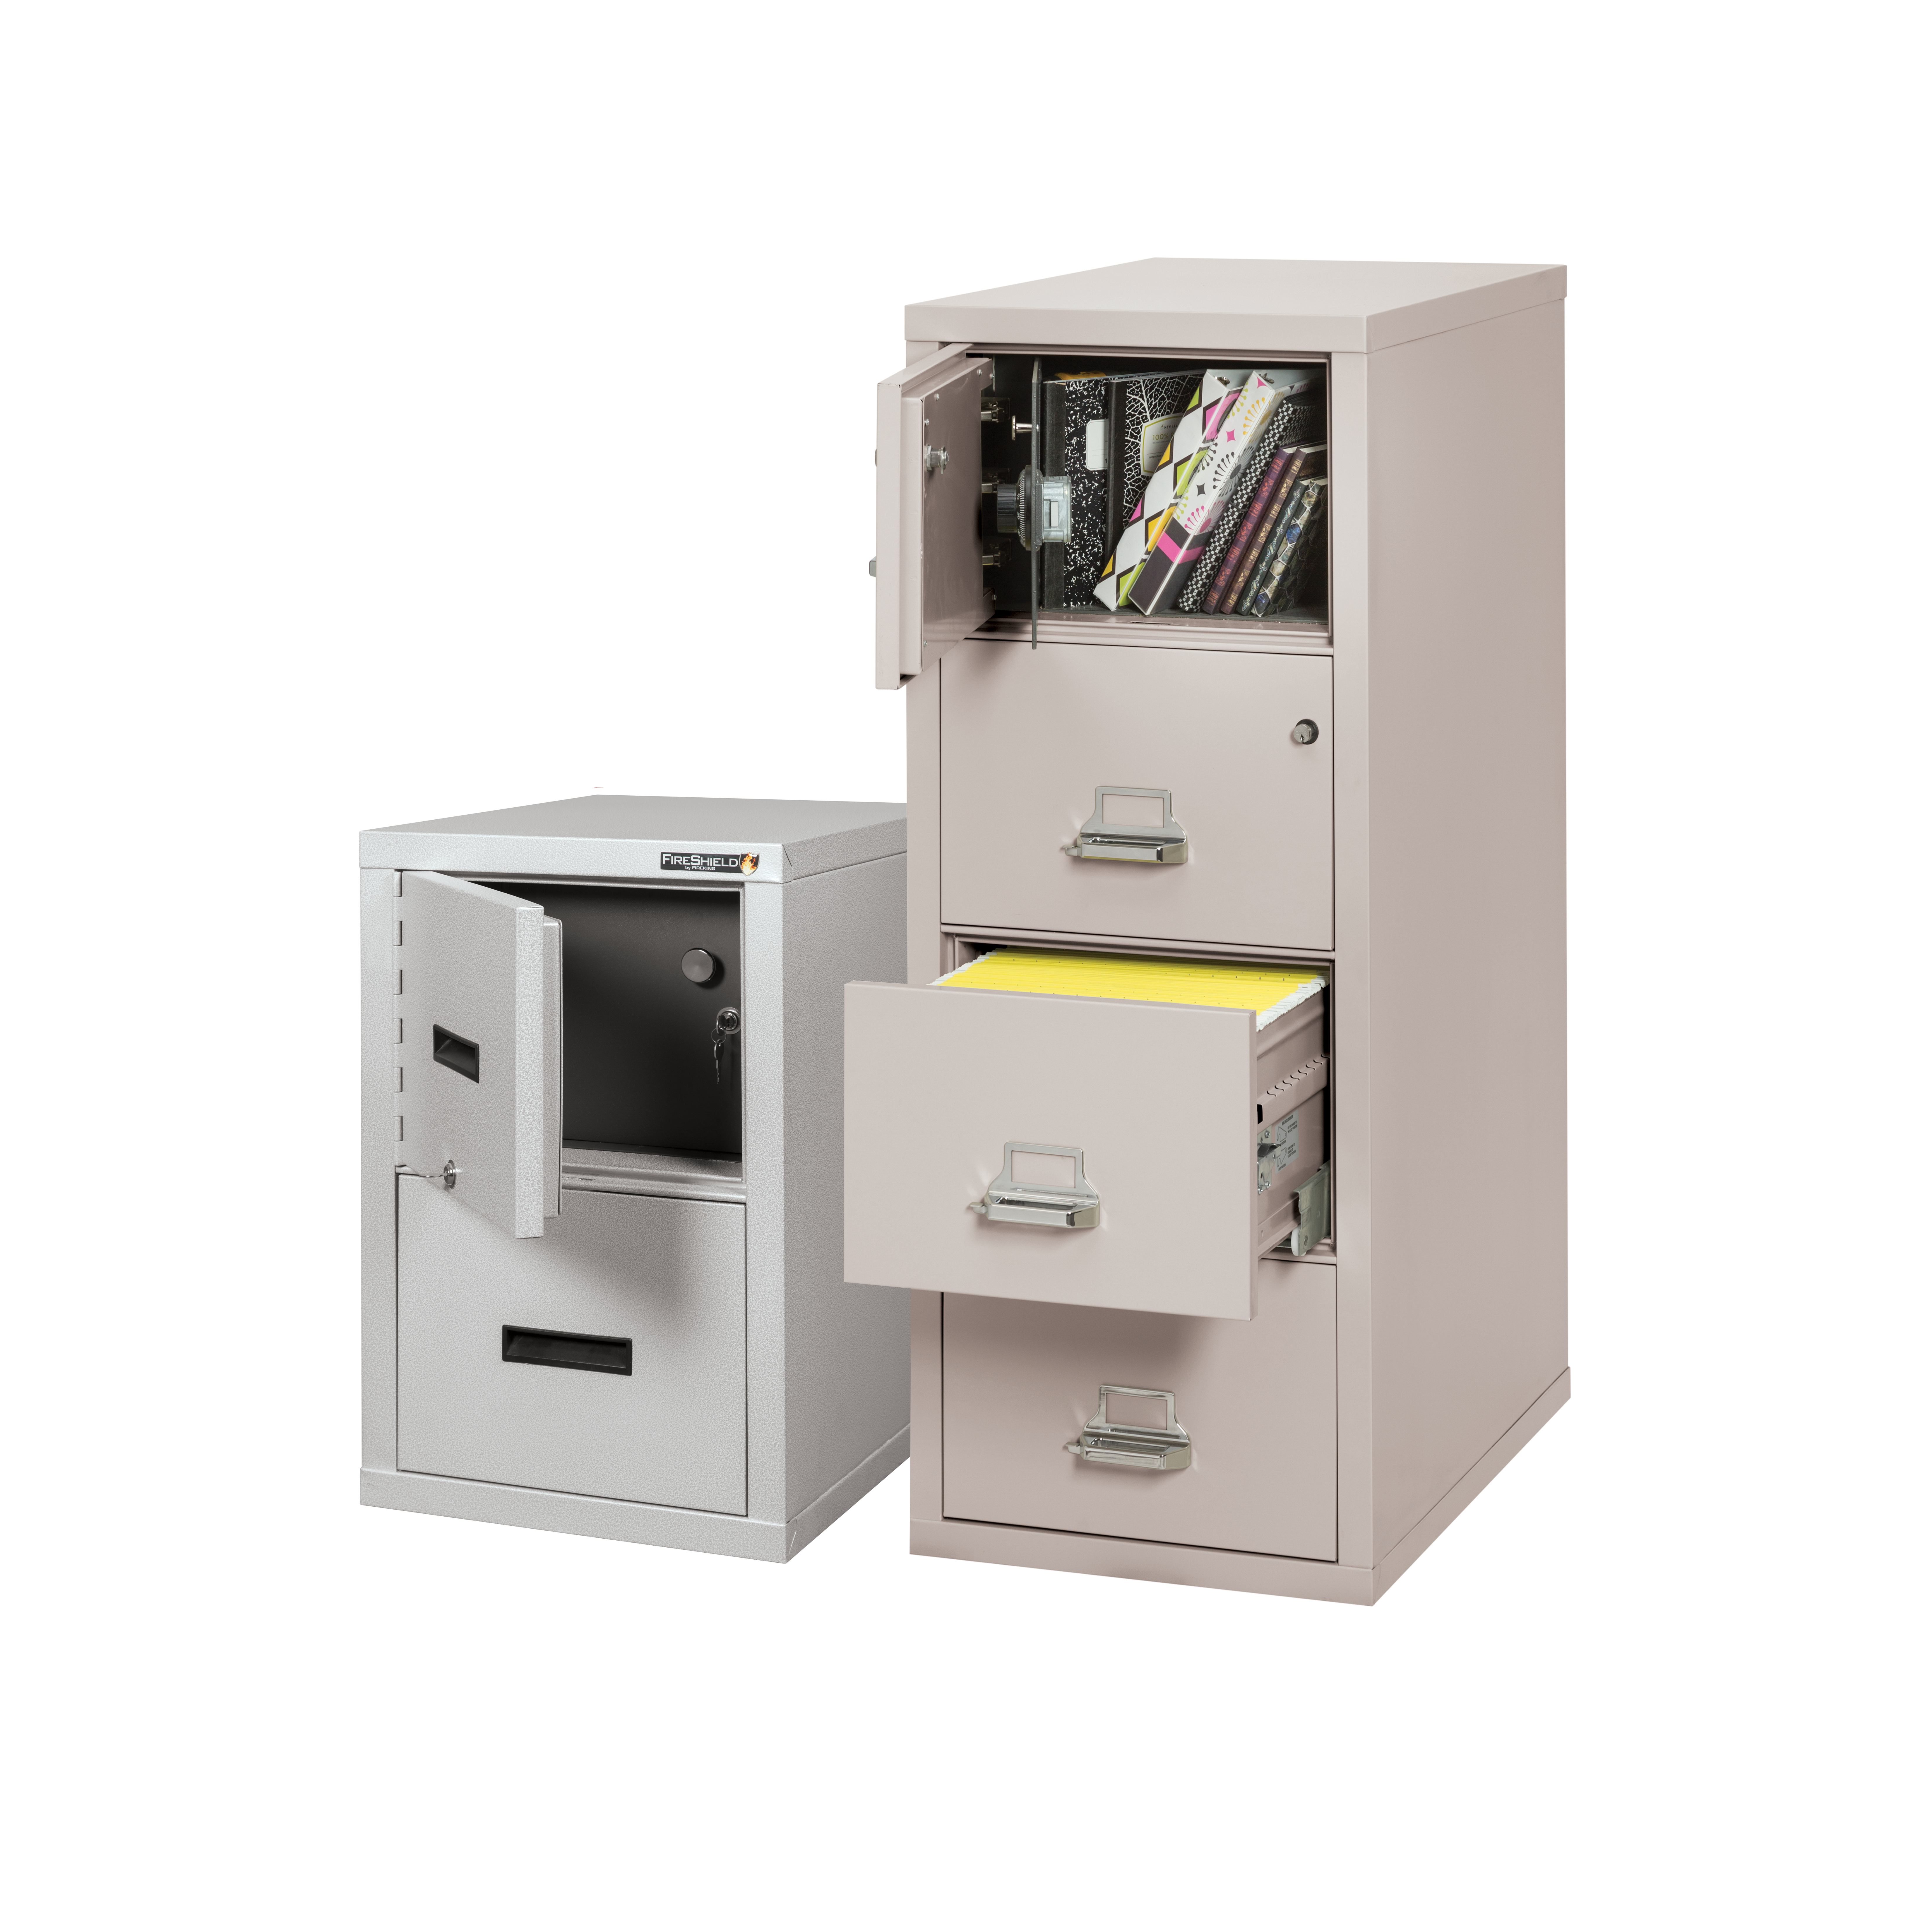 Safe In A File Cabinets Fireking Security Group within size 6600 X 6600